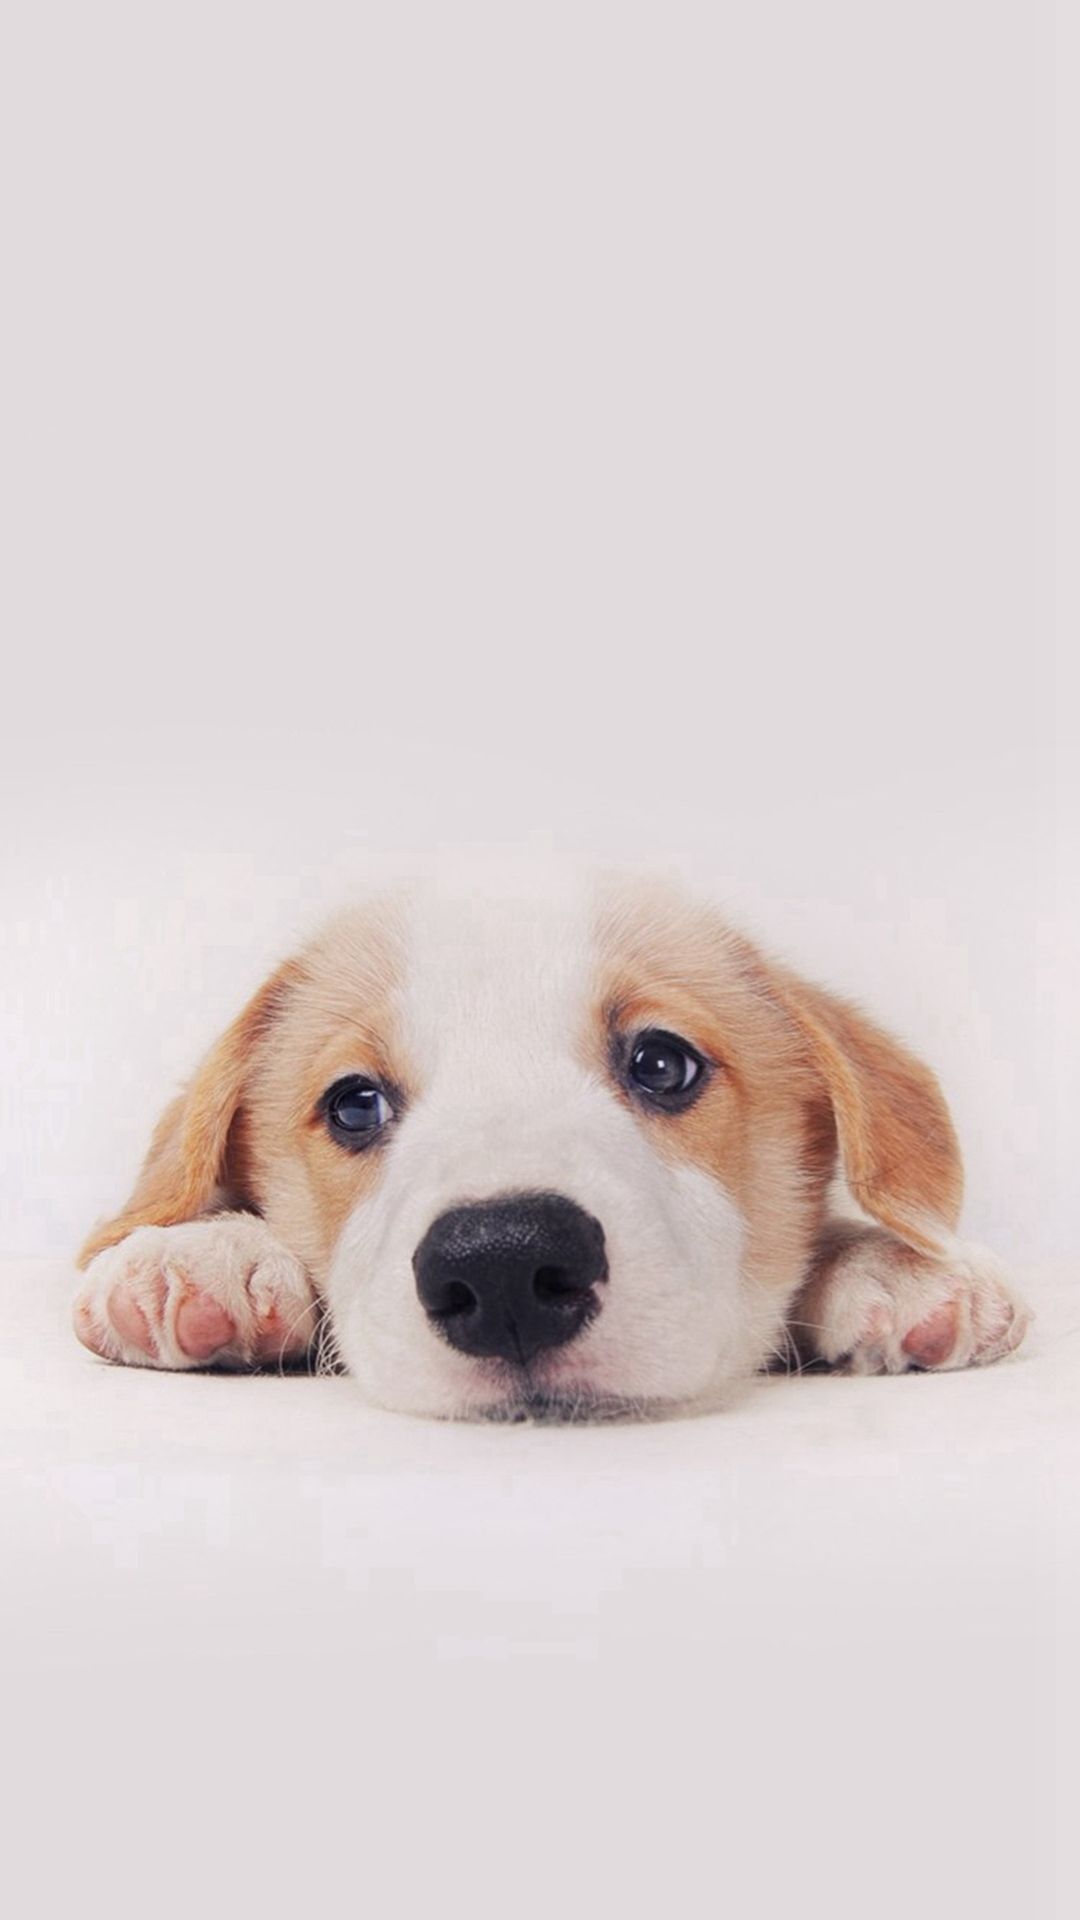 Free Download Cute Puppy Dog Pet Iphone 6 Wallpaper Download Iphone